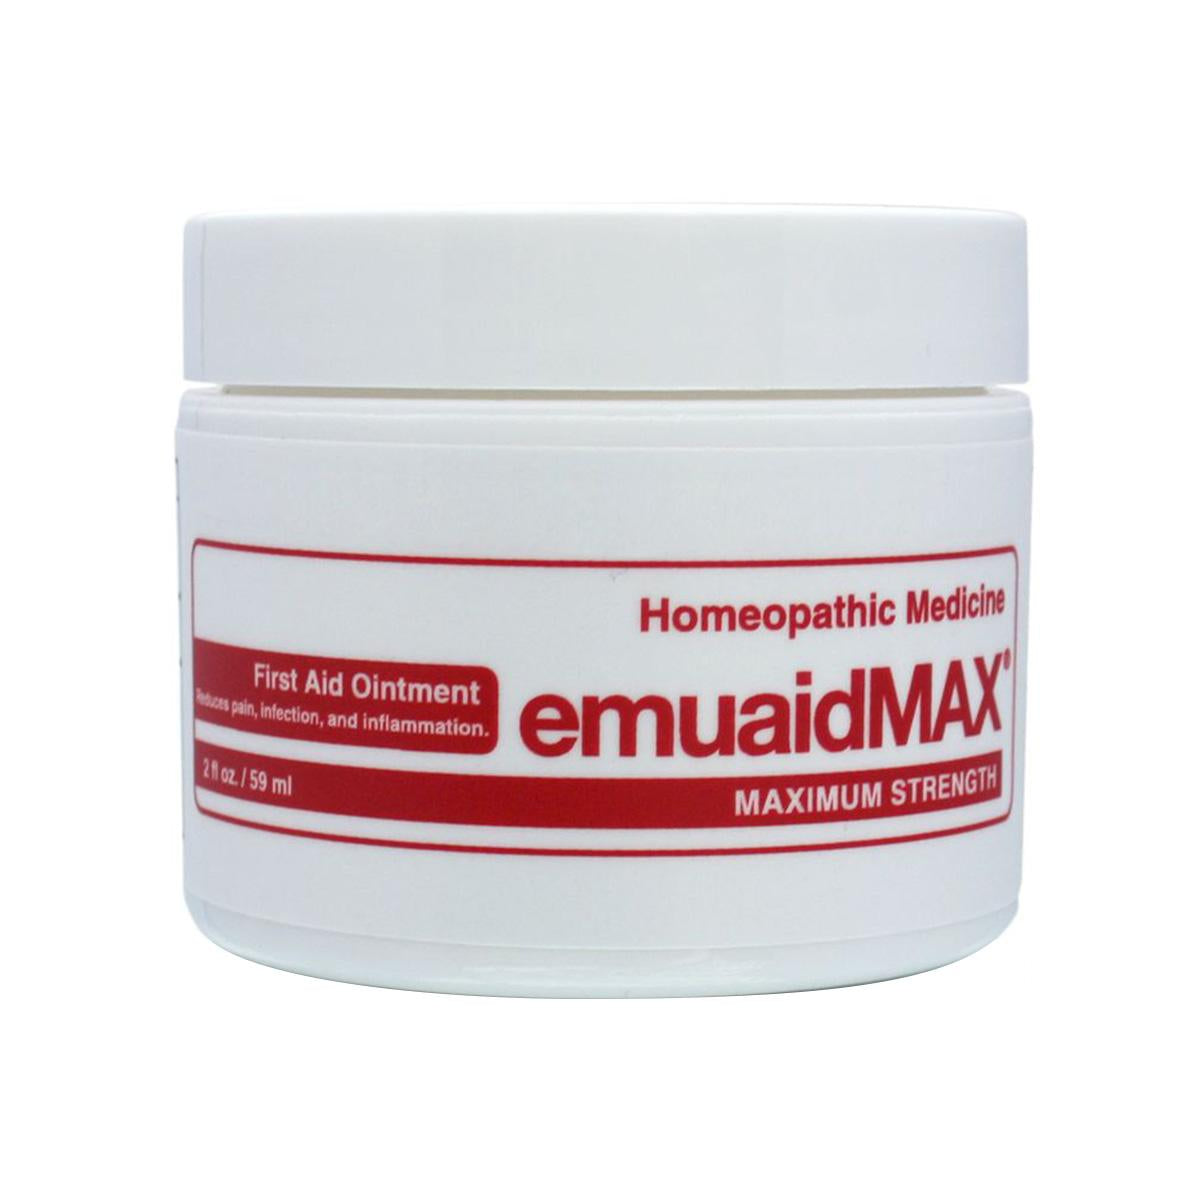 Primary image of Maximum Strength Emuaid Ointment